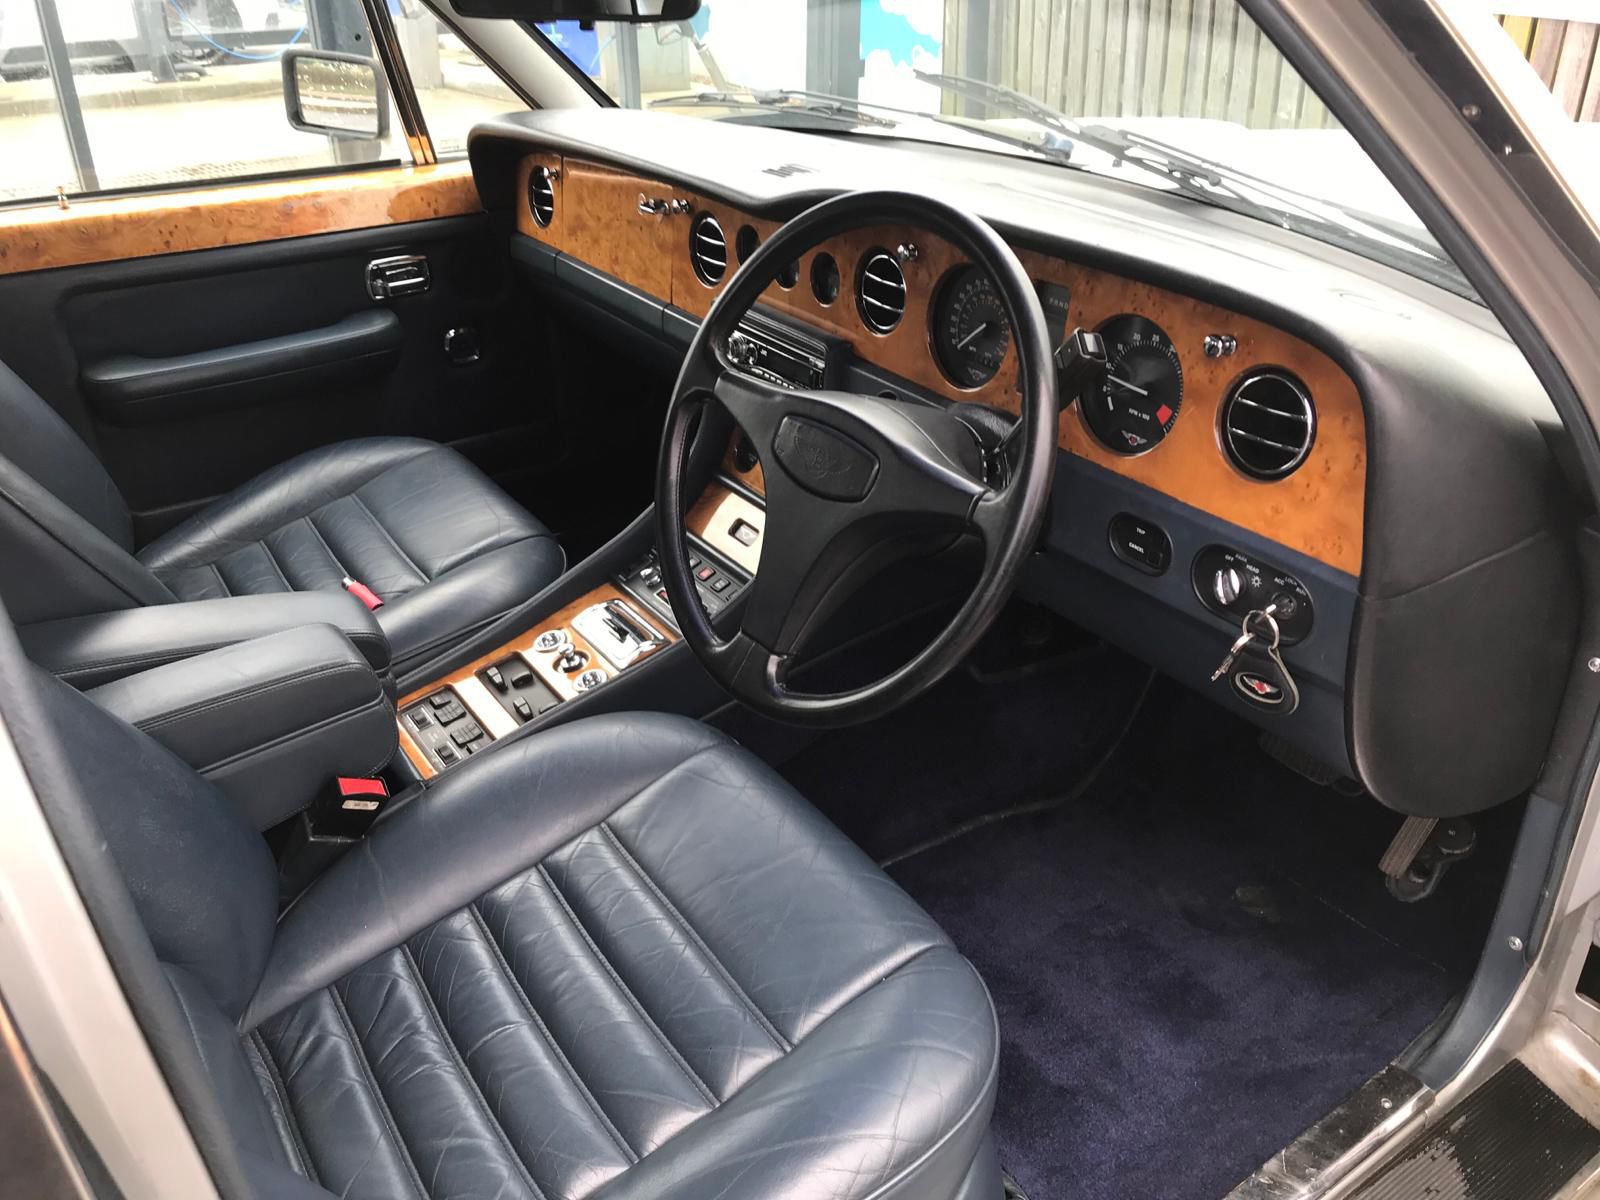 1990 Bentley Mulsanne S - Entry level motoring at a low estimate - Image 12 of 22